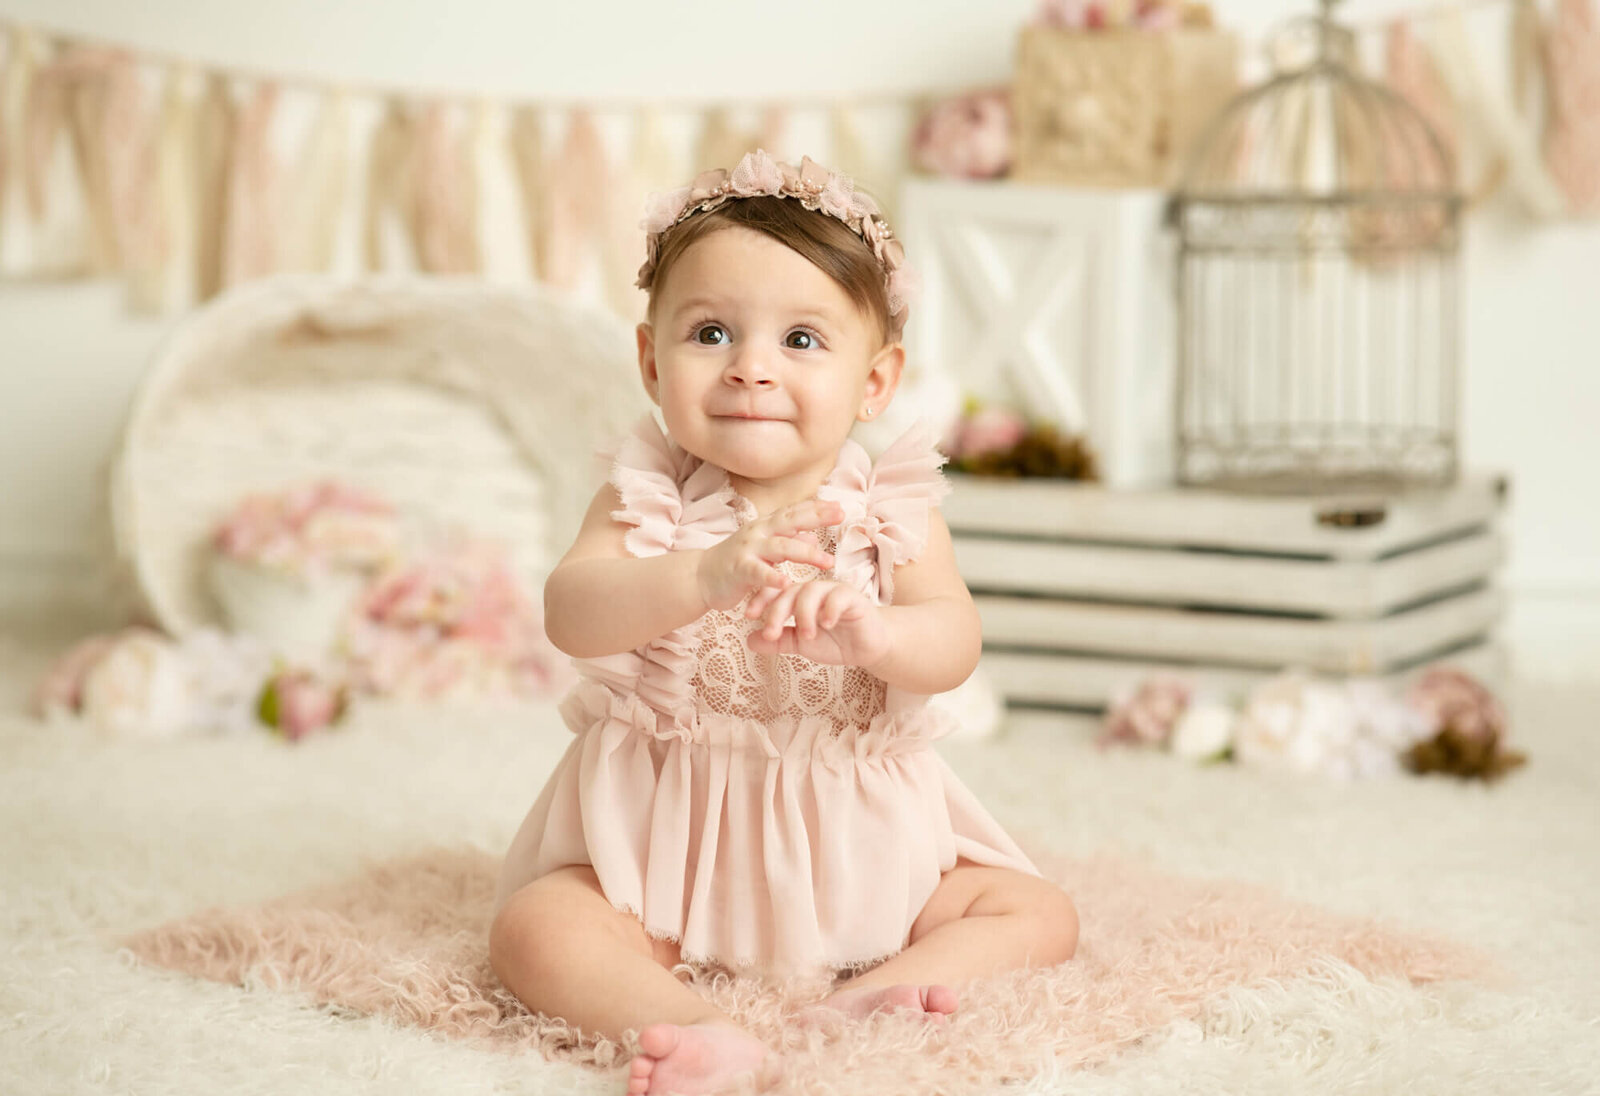 8 month old girl with pink romper and flowers